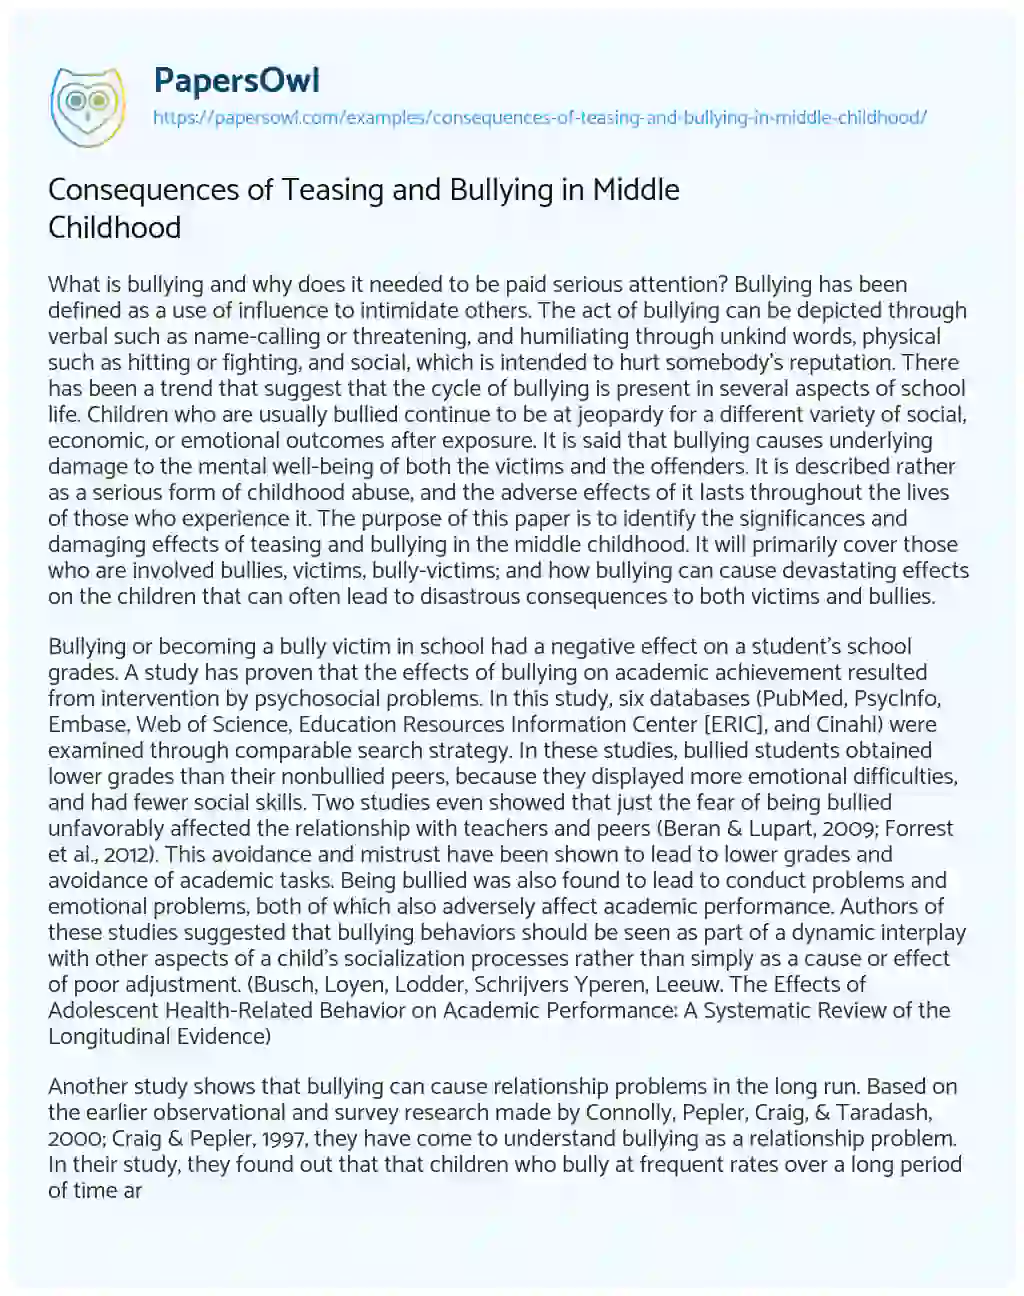 Essay on Consequences of Teasing and Bullying in Middle Childhood